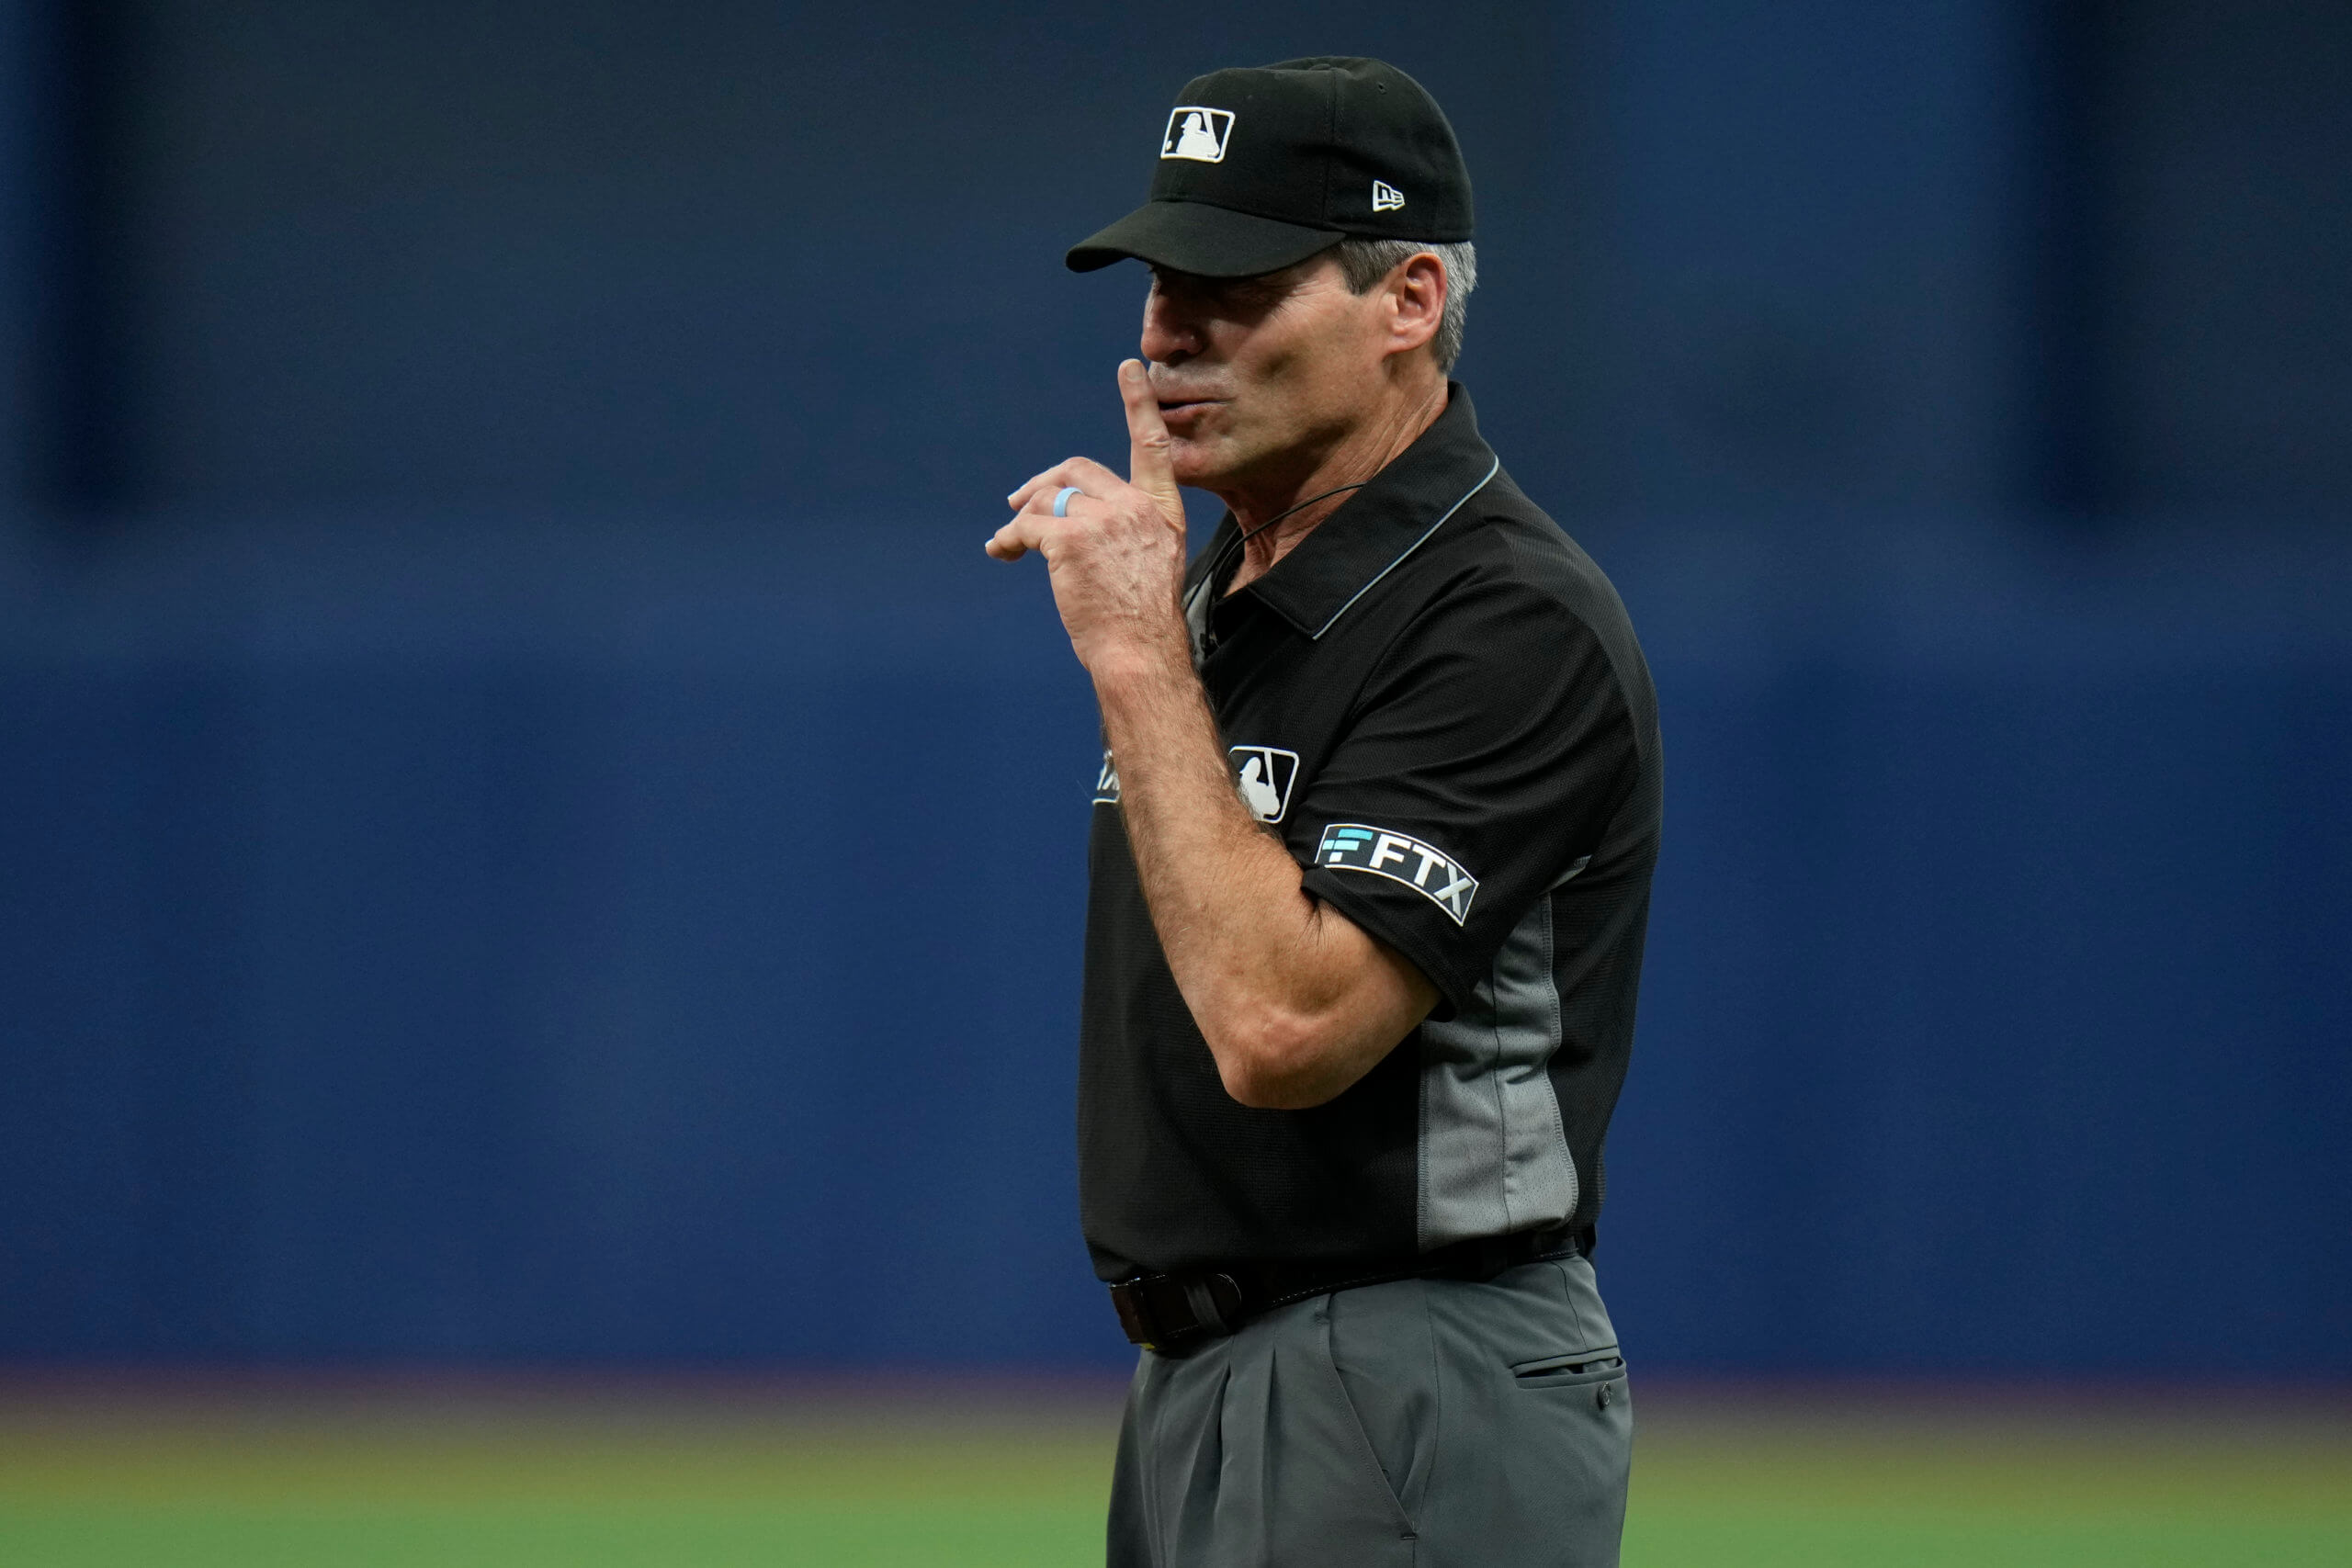 Angel Hernandez submits 2nd filing claiming MLB discriminated against  minority umpires